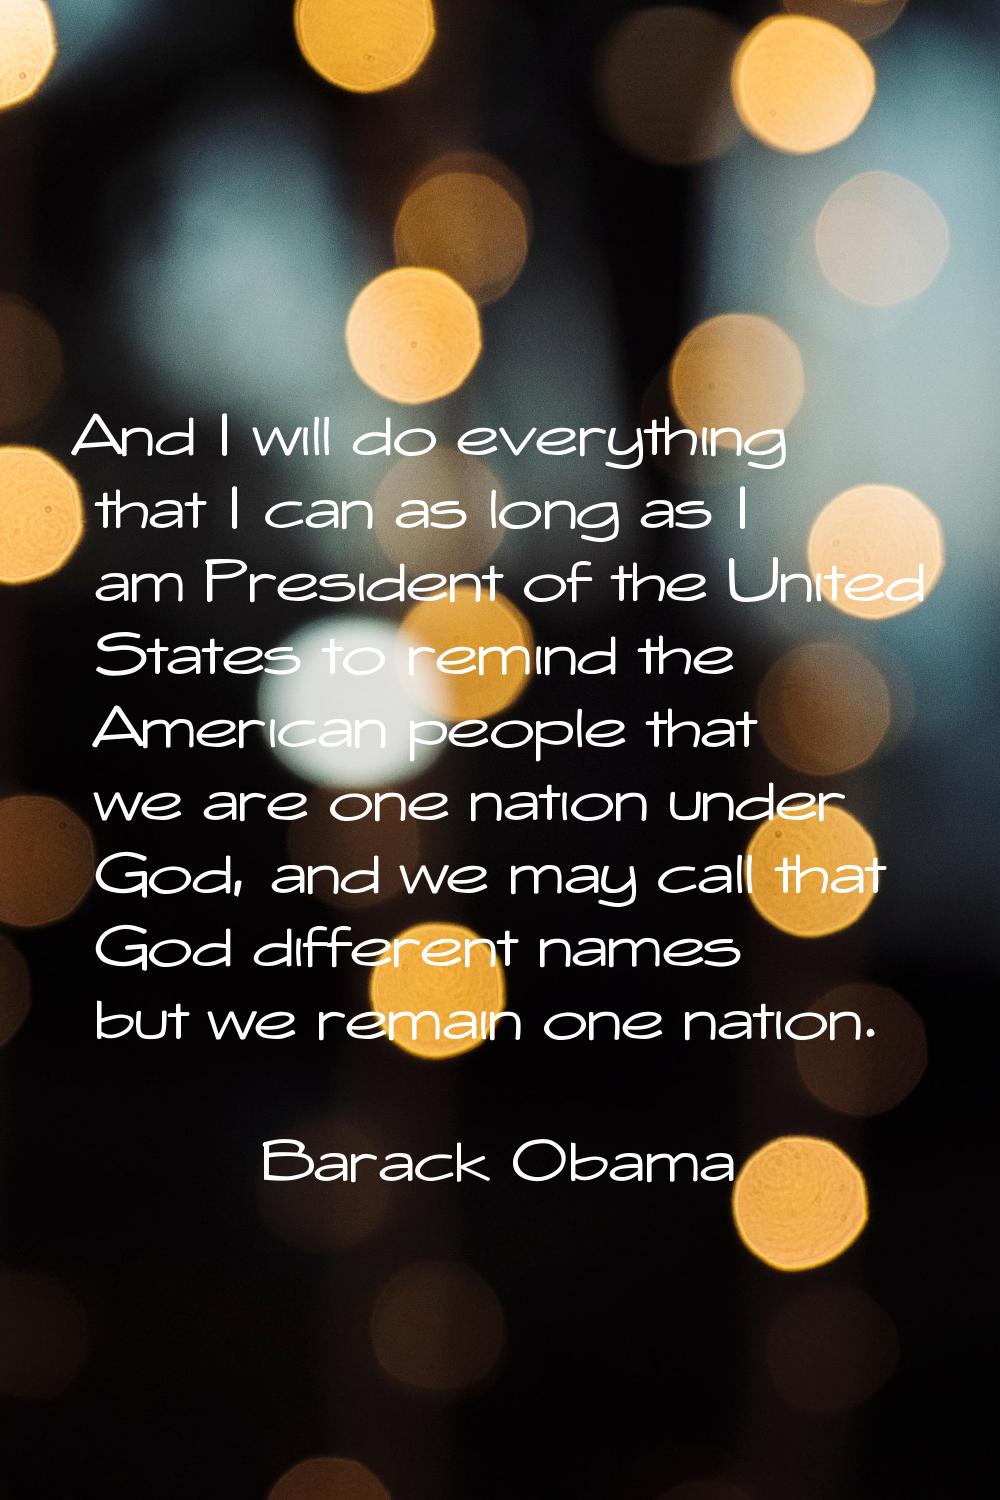 And I will do everything that I can as long as I am President of the United States to remind the Am